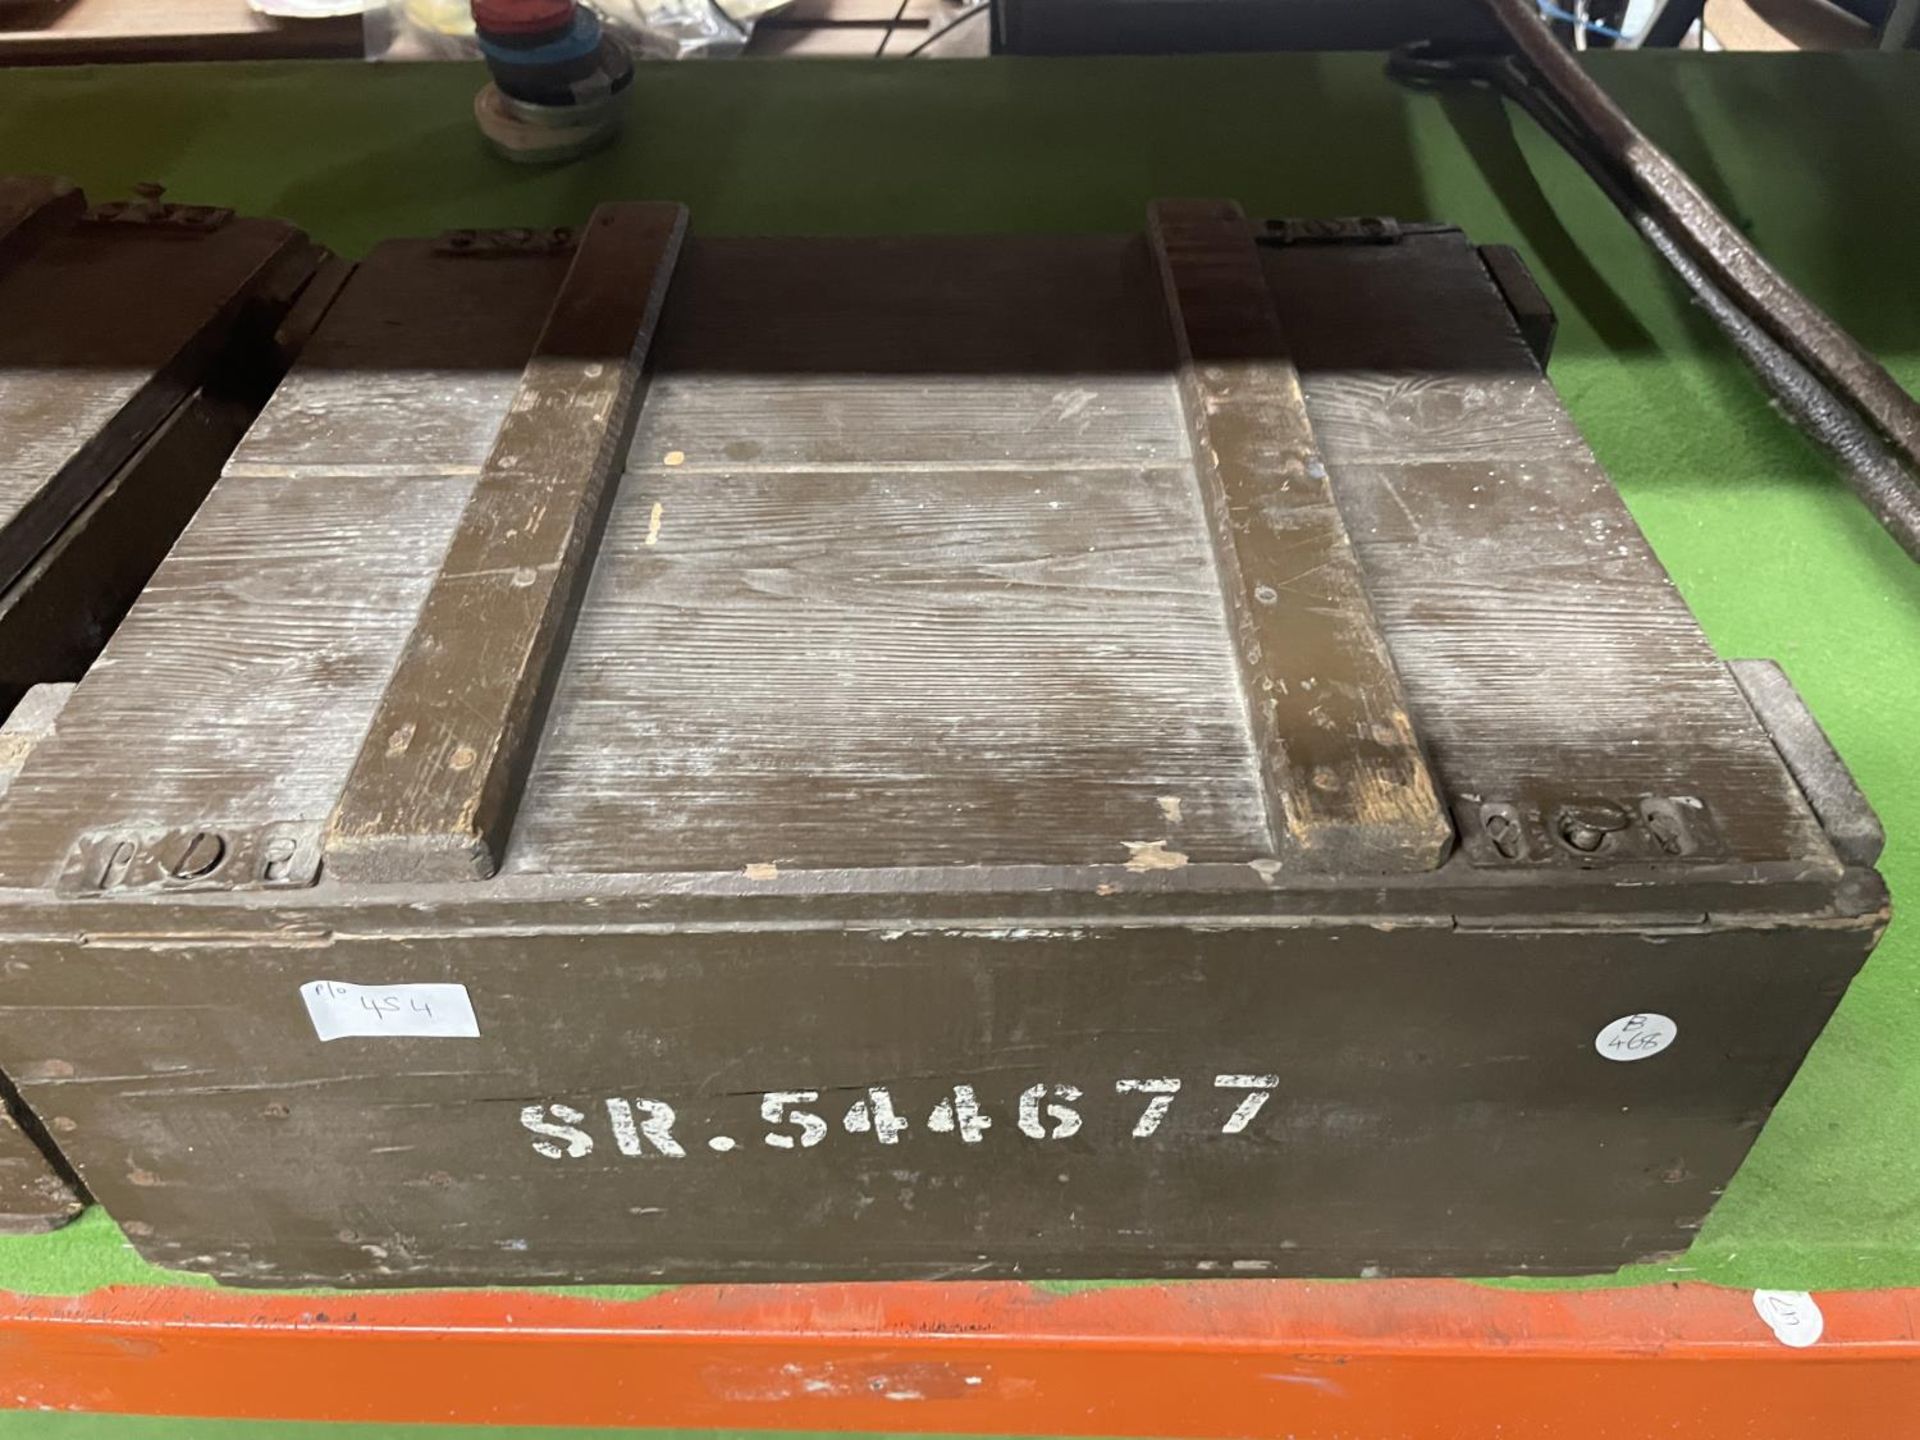 TWO GREEN PAINTED AMMUNITION BOXES MARKED SR 544677, AND A 1950 MILITARY ENAMEL PLATE (3) - Image 3 of 3